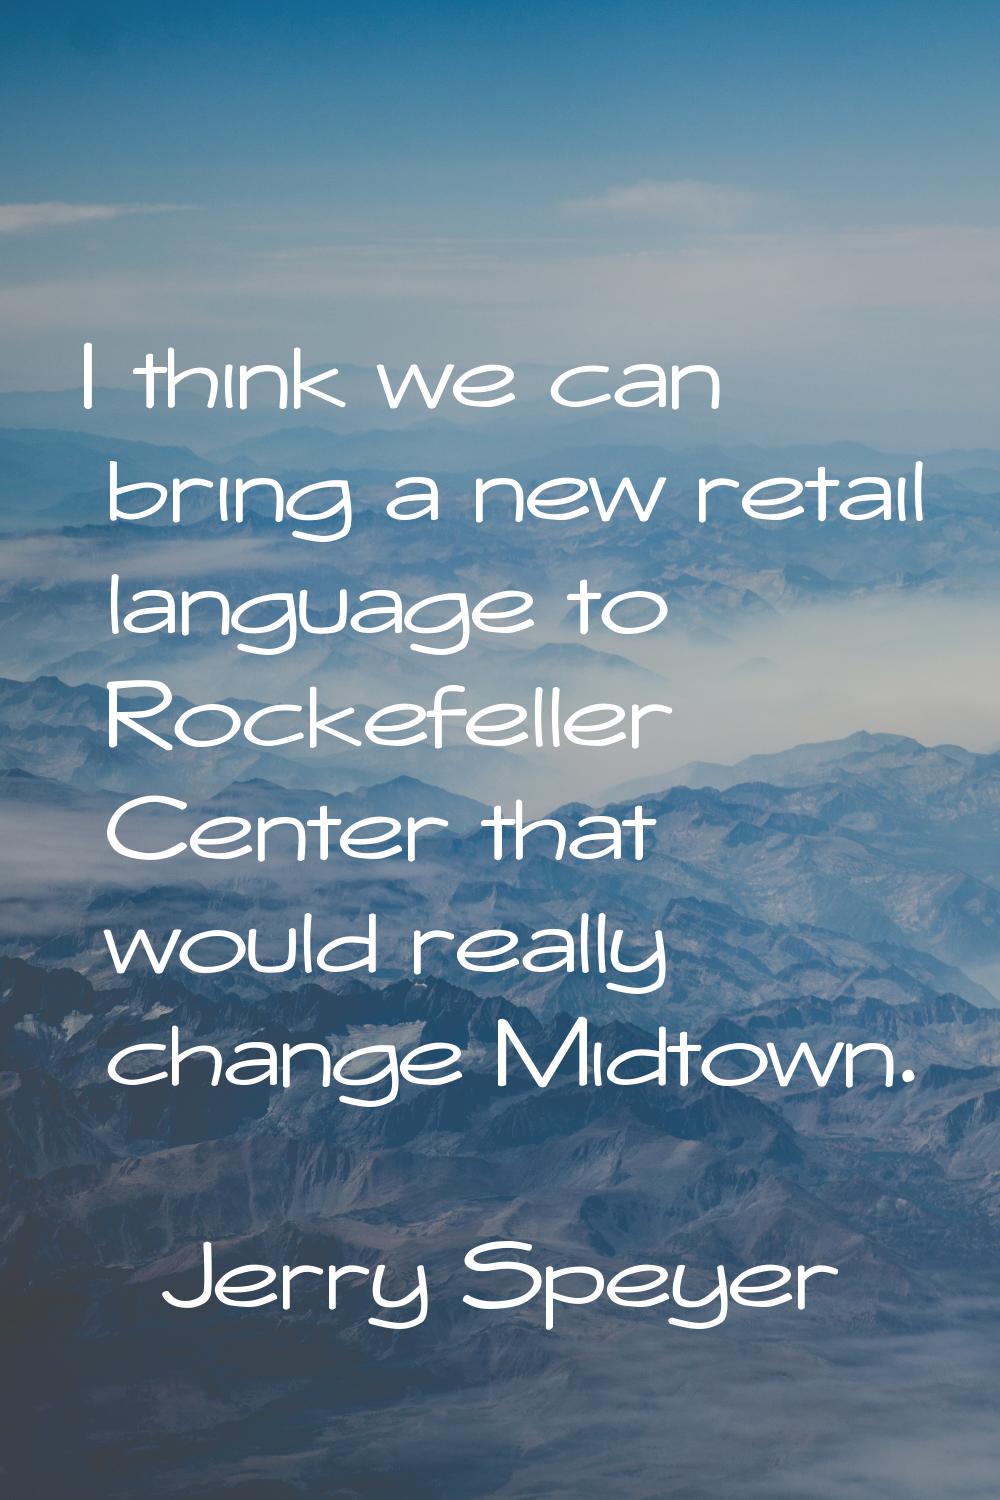 I think we can bring a new retail language to Rockefeller Center that would really change Midtown.